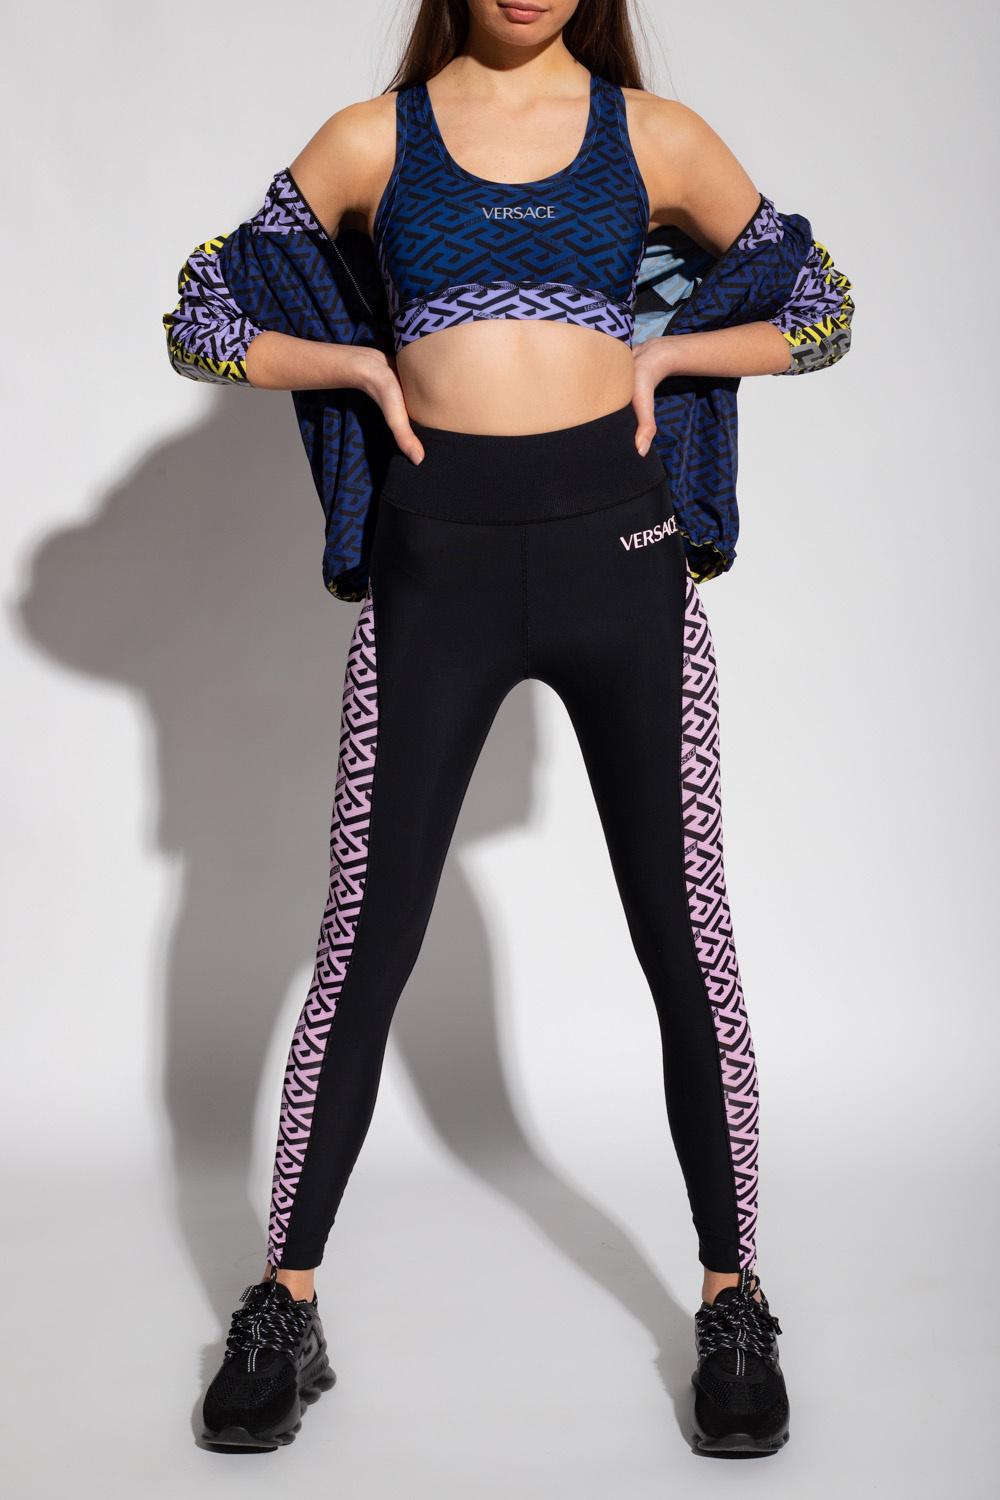 VERSACE COLLECTION LEGGINGS – lestyle